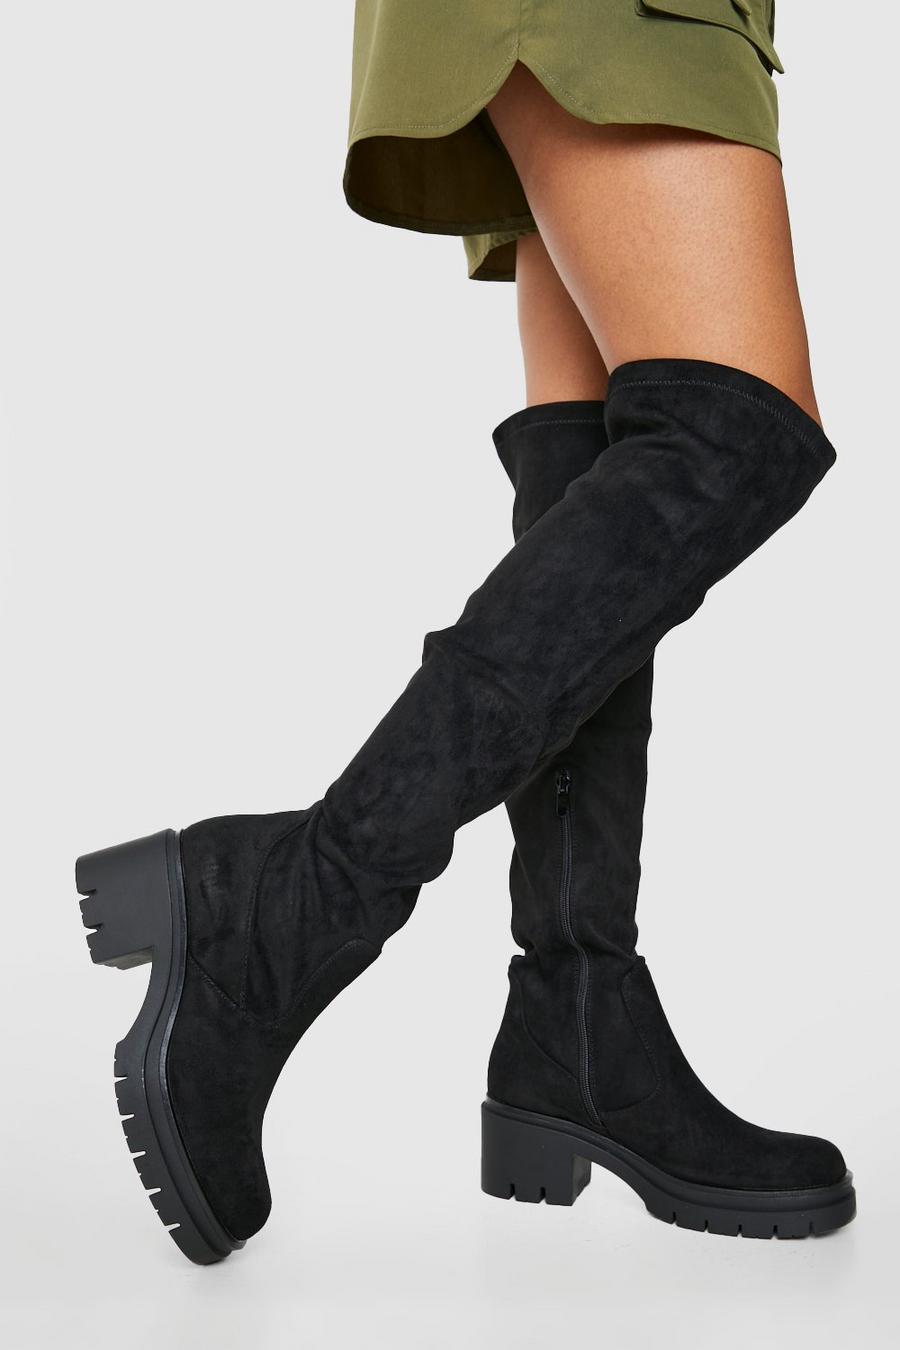 Black Block Heel Cleated Over The Knee Boots